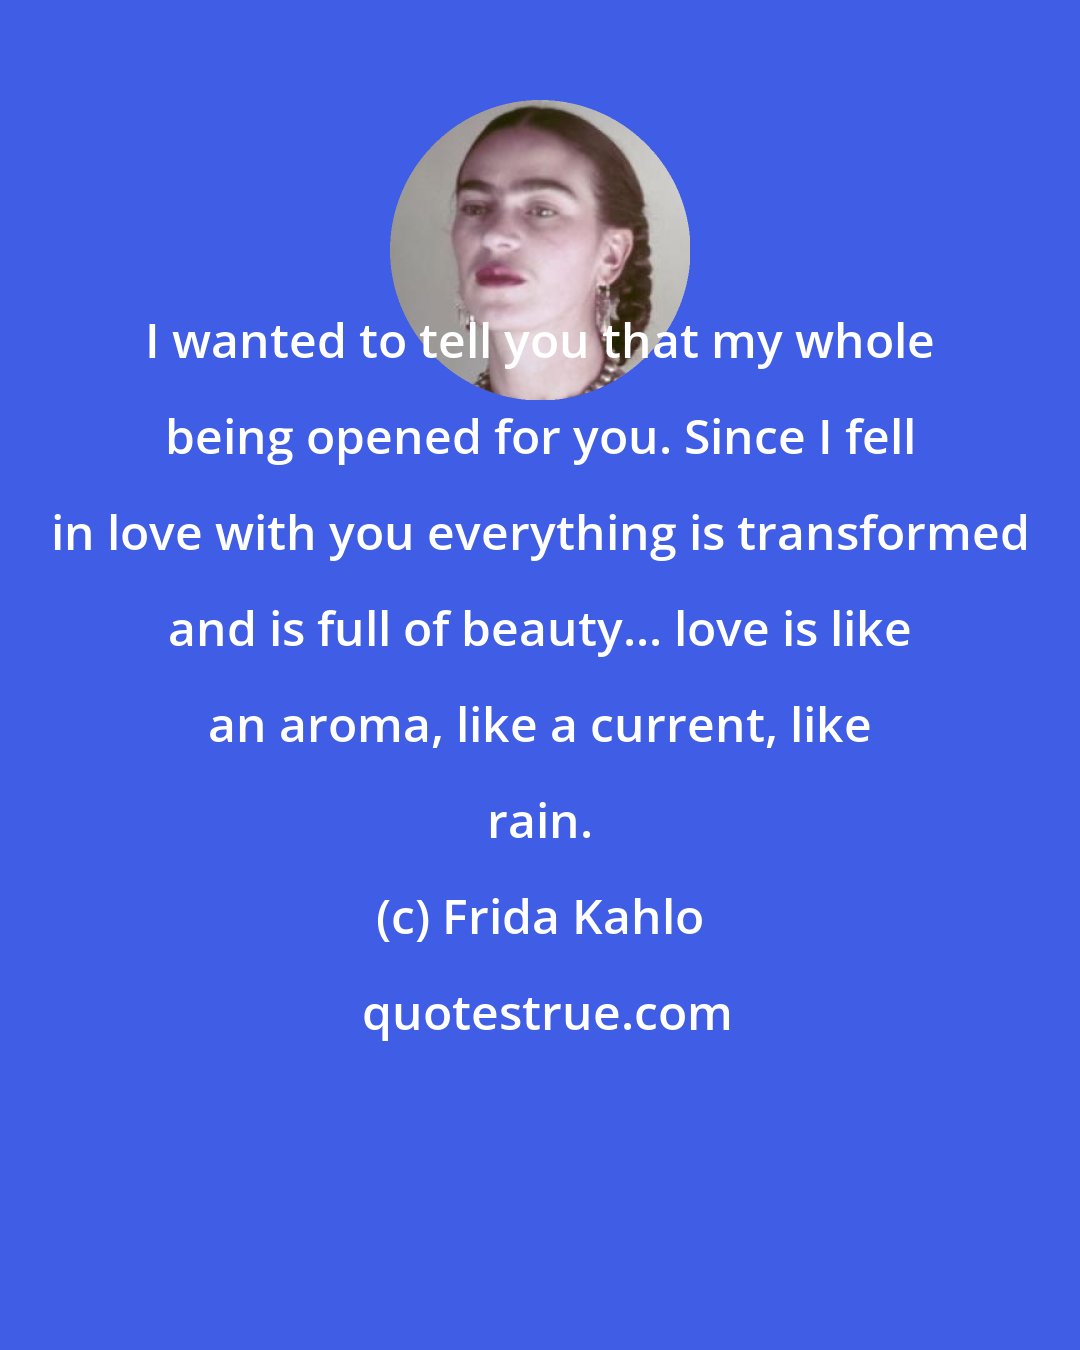 Frida Kahlo: I wanted to tell you that my whole being opened for you. Since I fell in love with you everything is transformed and is full of beauty... love is like an aroma, like a current, like rain.